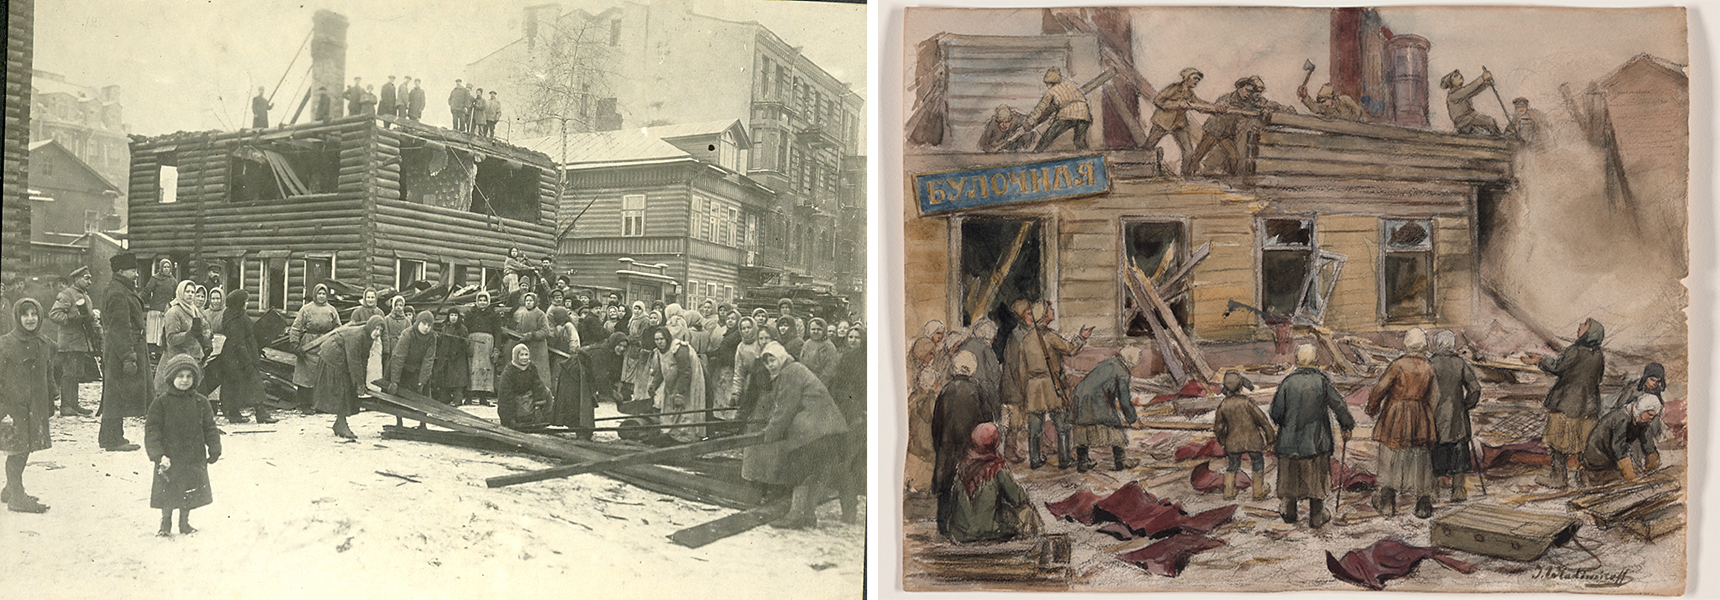 Comparison of photo and watercolor depictions of Petrograd after the 1917 Russian Revolution